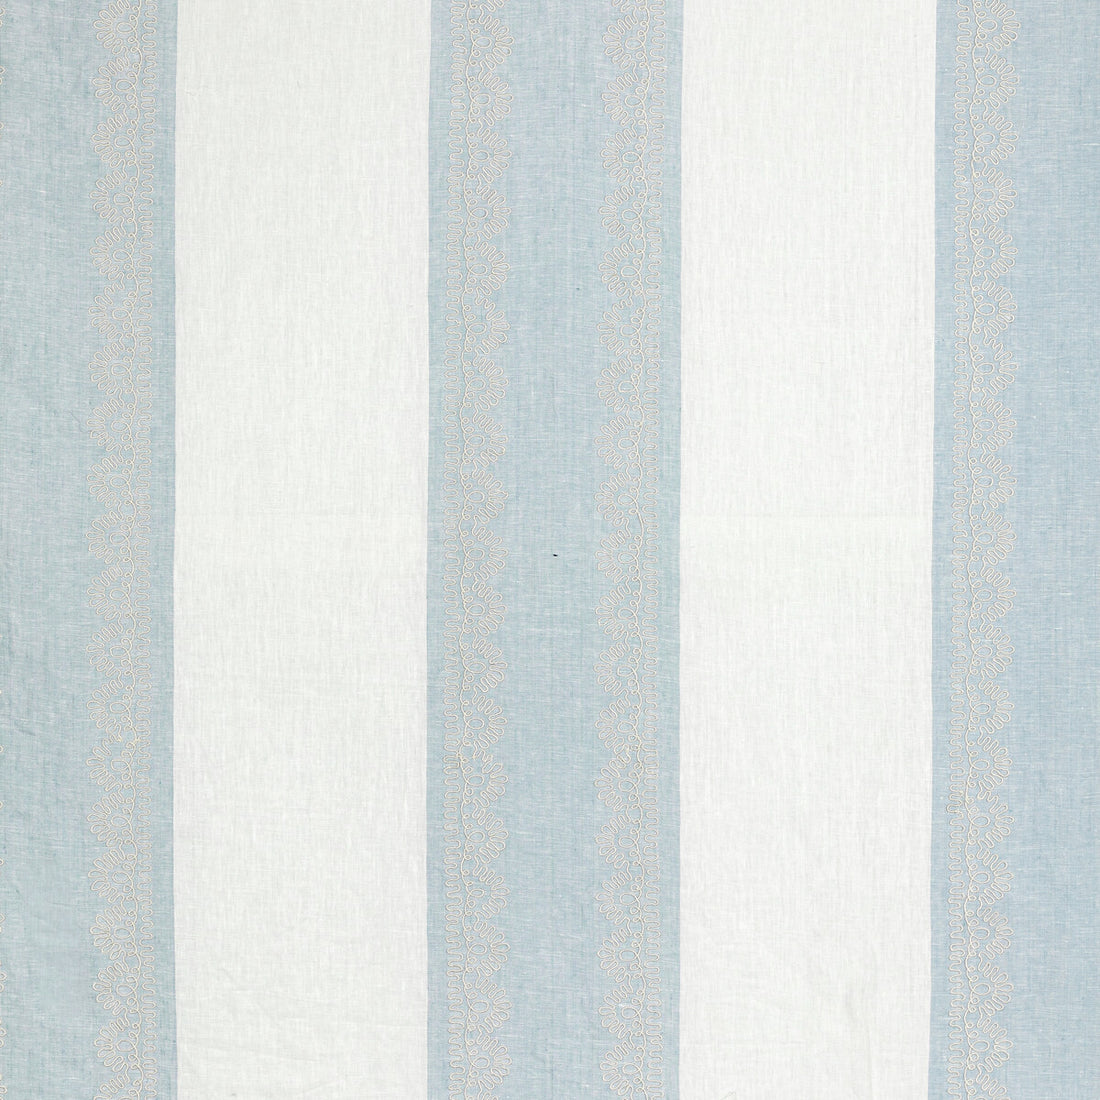 Banner Sheer fabric in chambray color - pattern 2021123.15.0 - by Lee Jofa in the Summerland collection